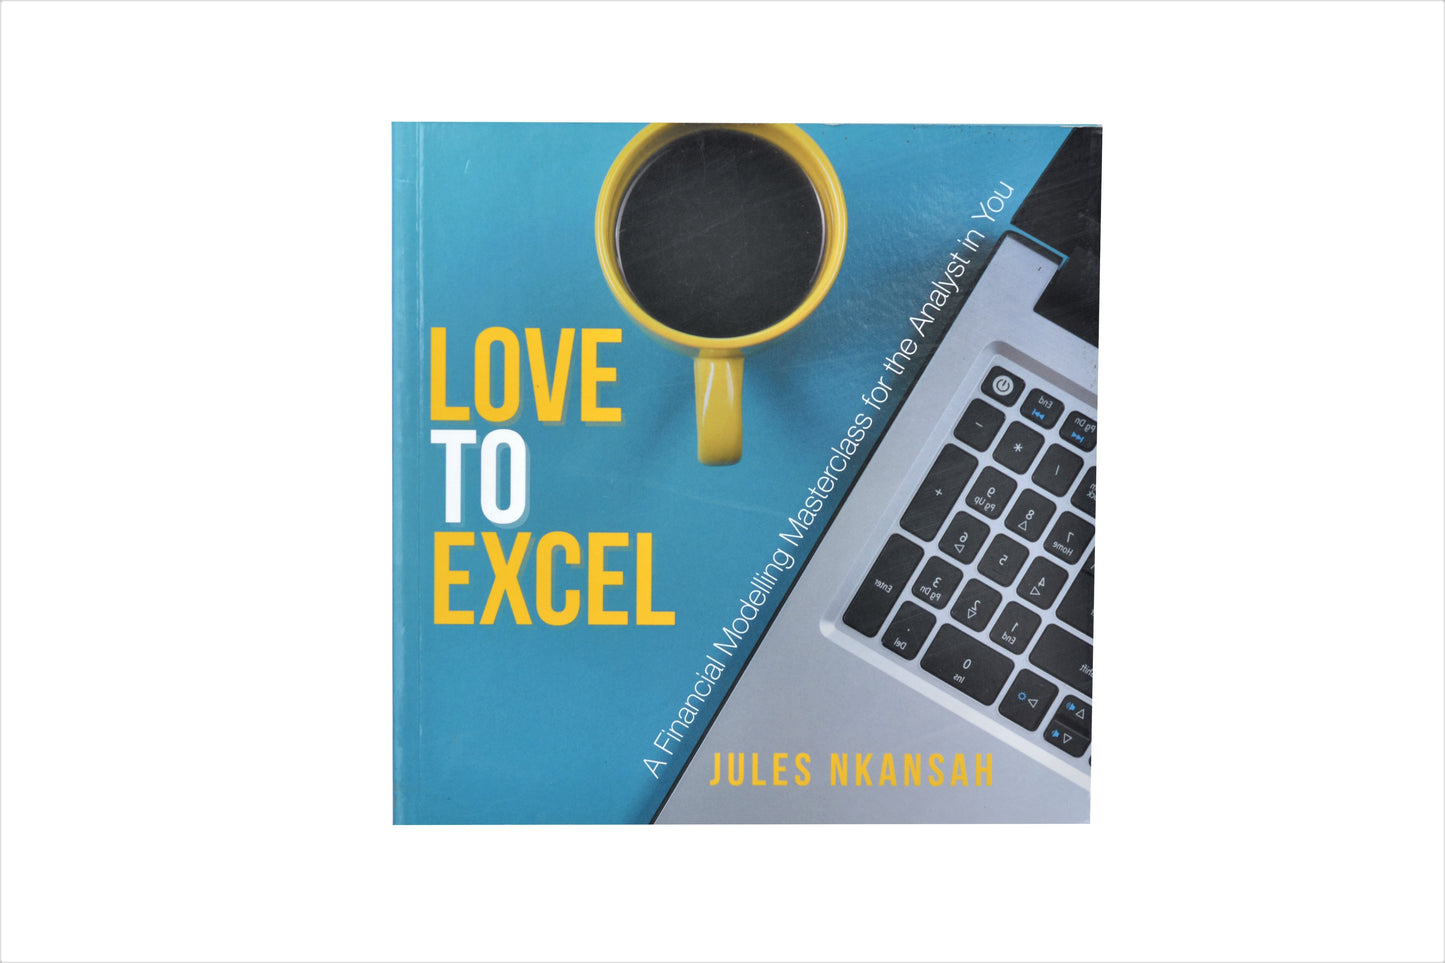 LOVE TO EXCEL